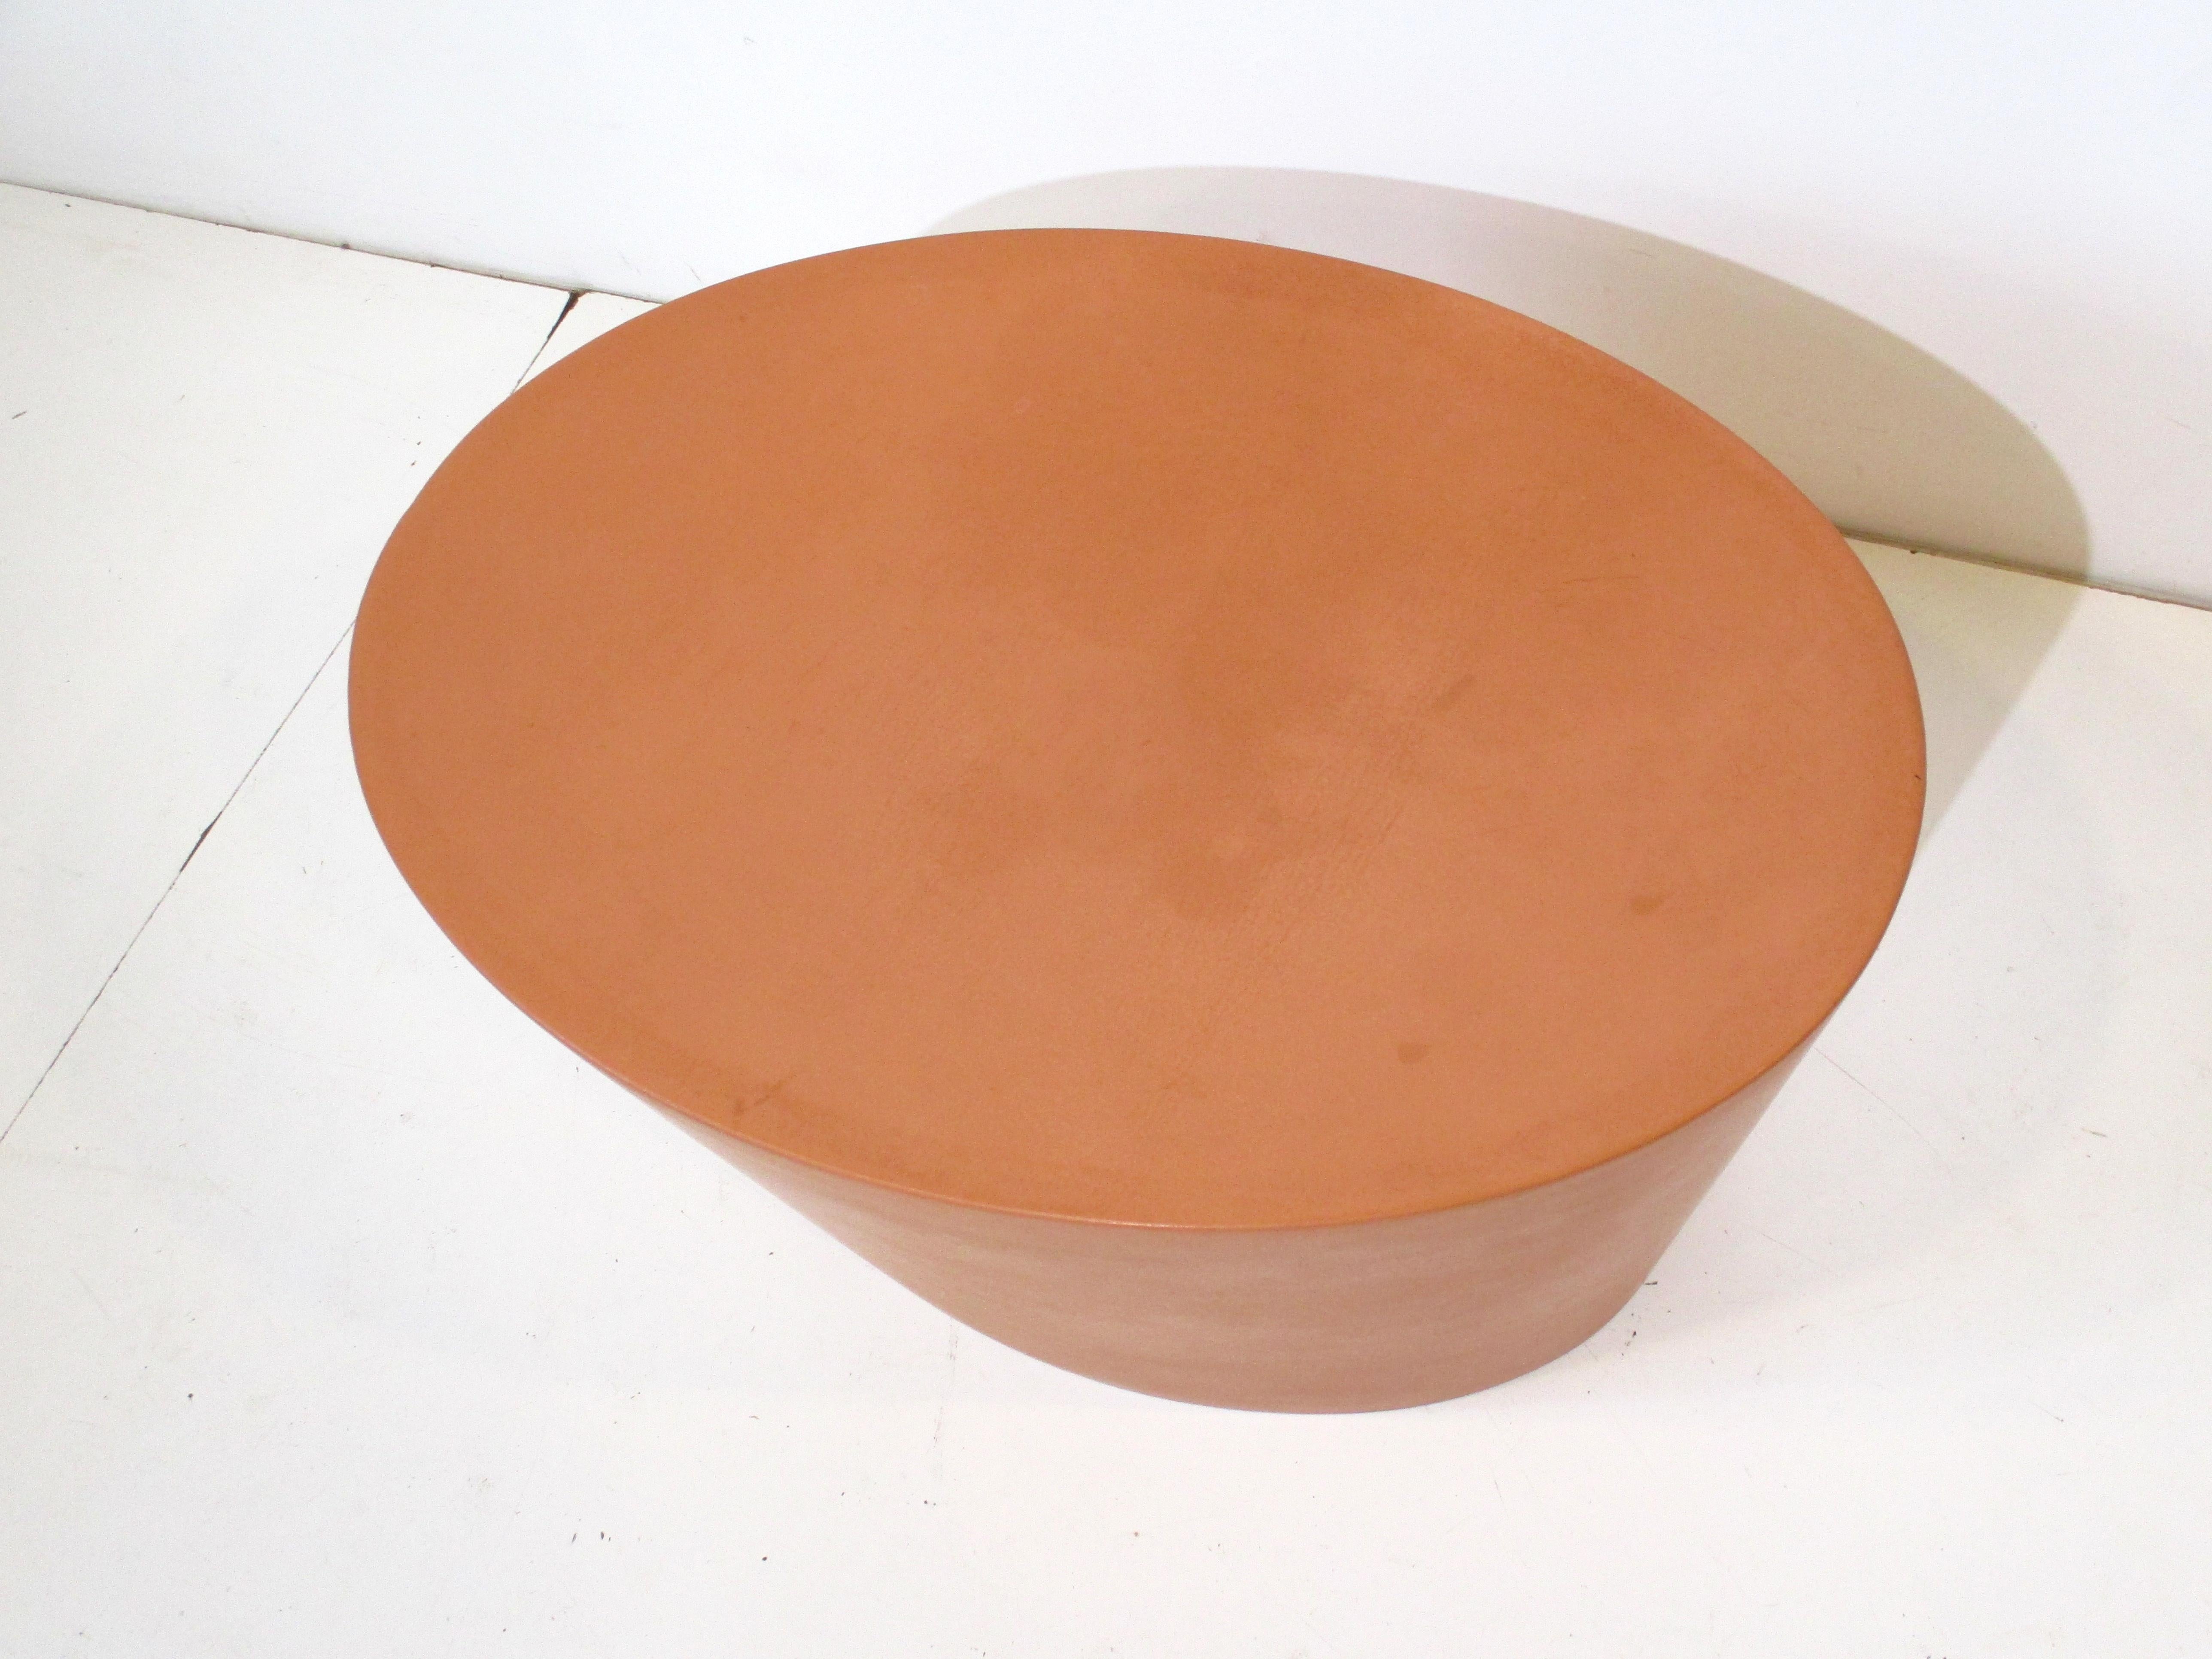 Maya Lin Concrete Stool / Coffee Table for Knoll Studio In Good Condition For Sale In Cincinnati, OH